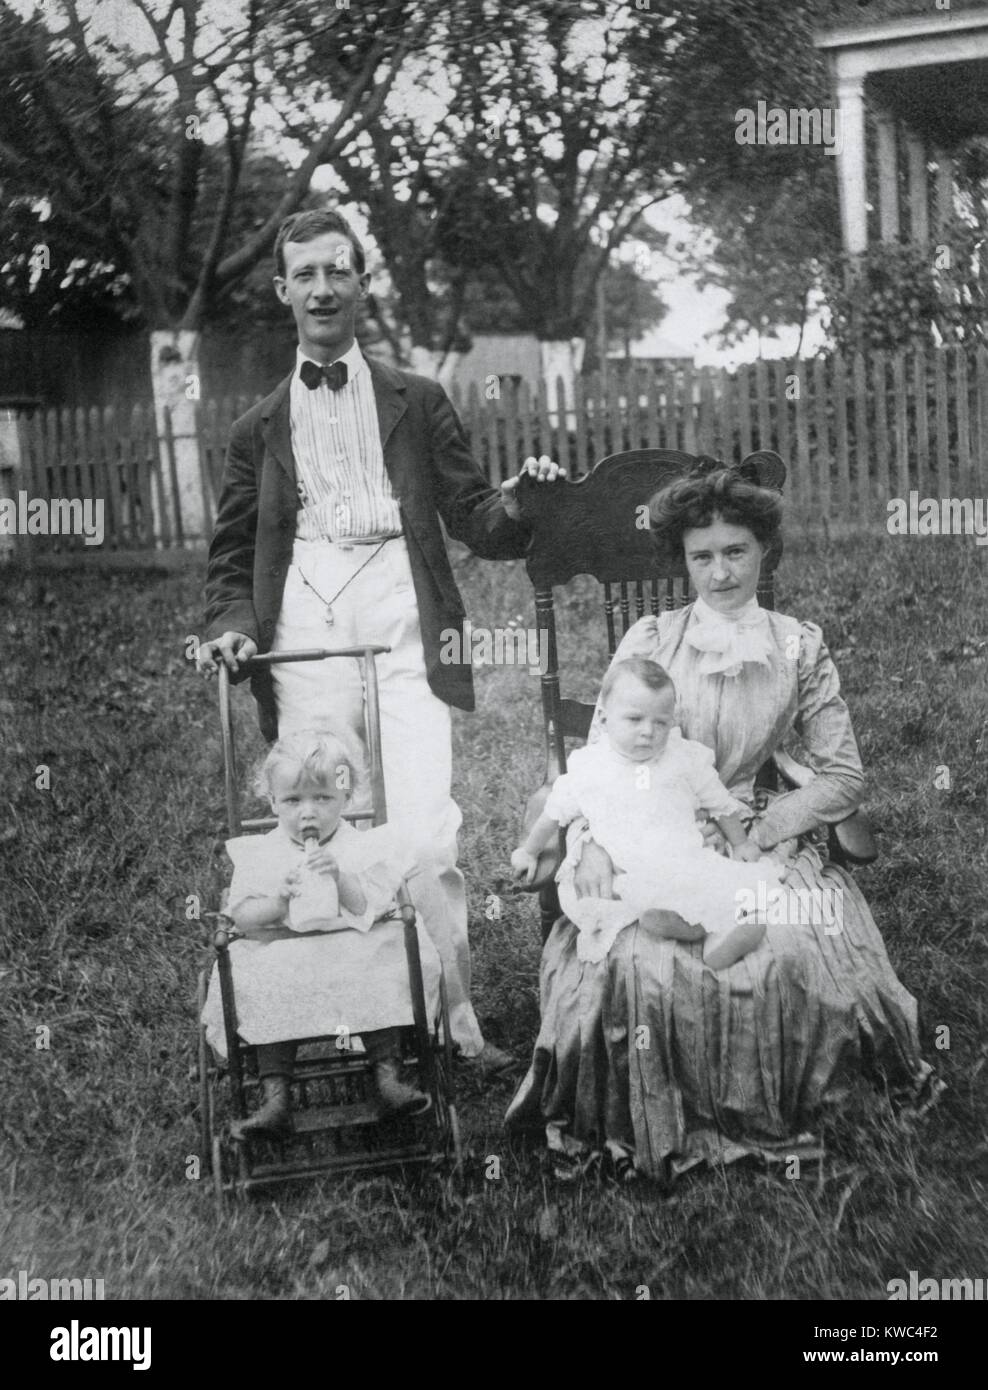 Alfred E. Smith at the age of 27 with his wife, Catherine Ann Dunn Smith and two babies. Ca. 1900. (BSLOC 2015 15 202) Stock Photo